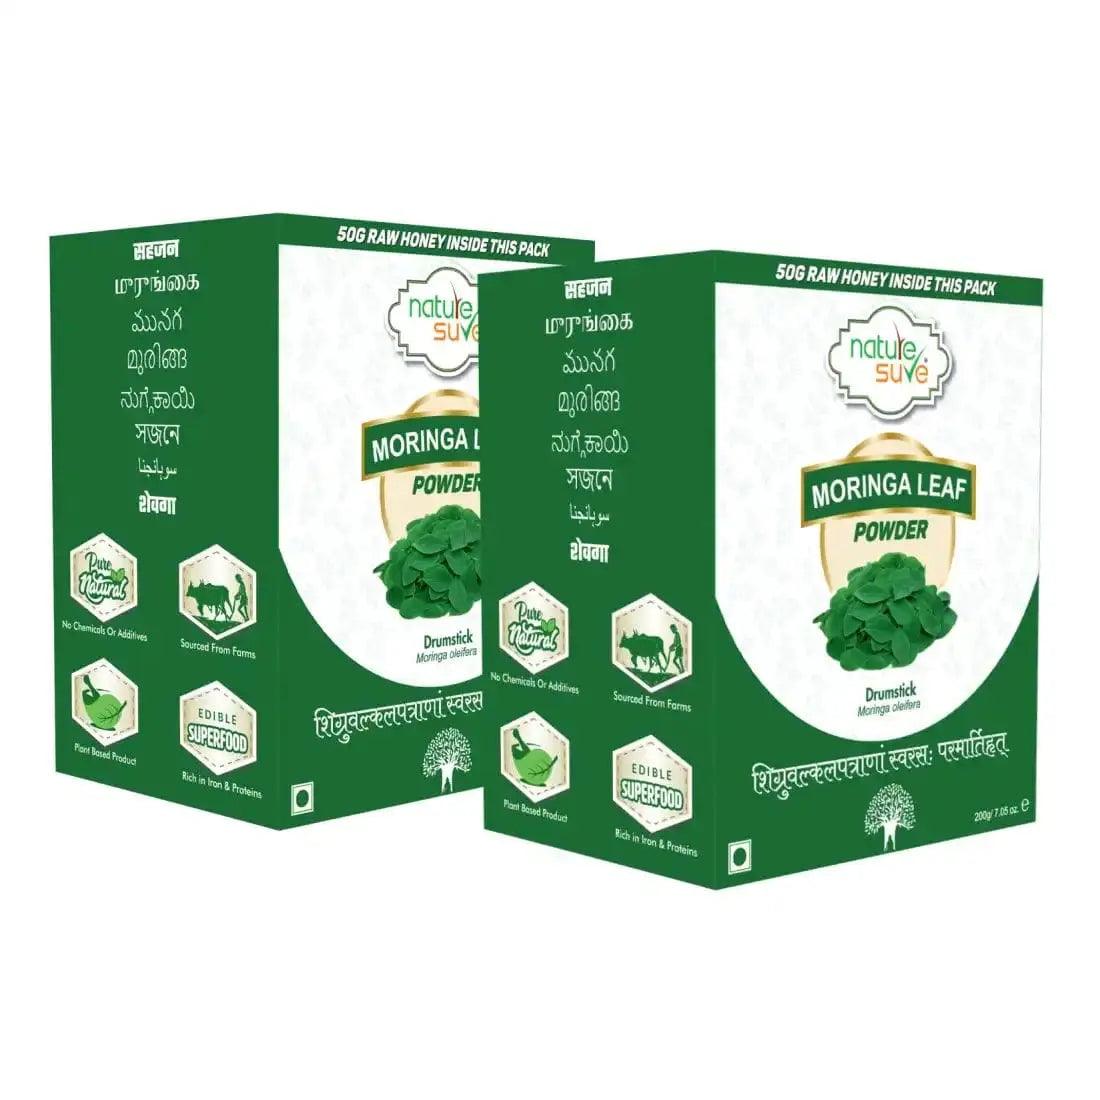 Buy 2 Packs of Nature Sure Moringa Leaf Atta Mix 200 grams each Directly From Company's Official Brand Store